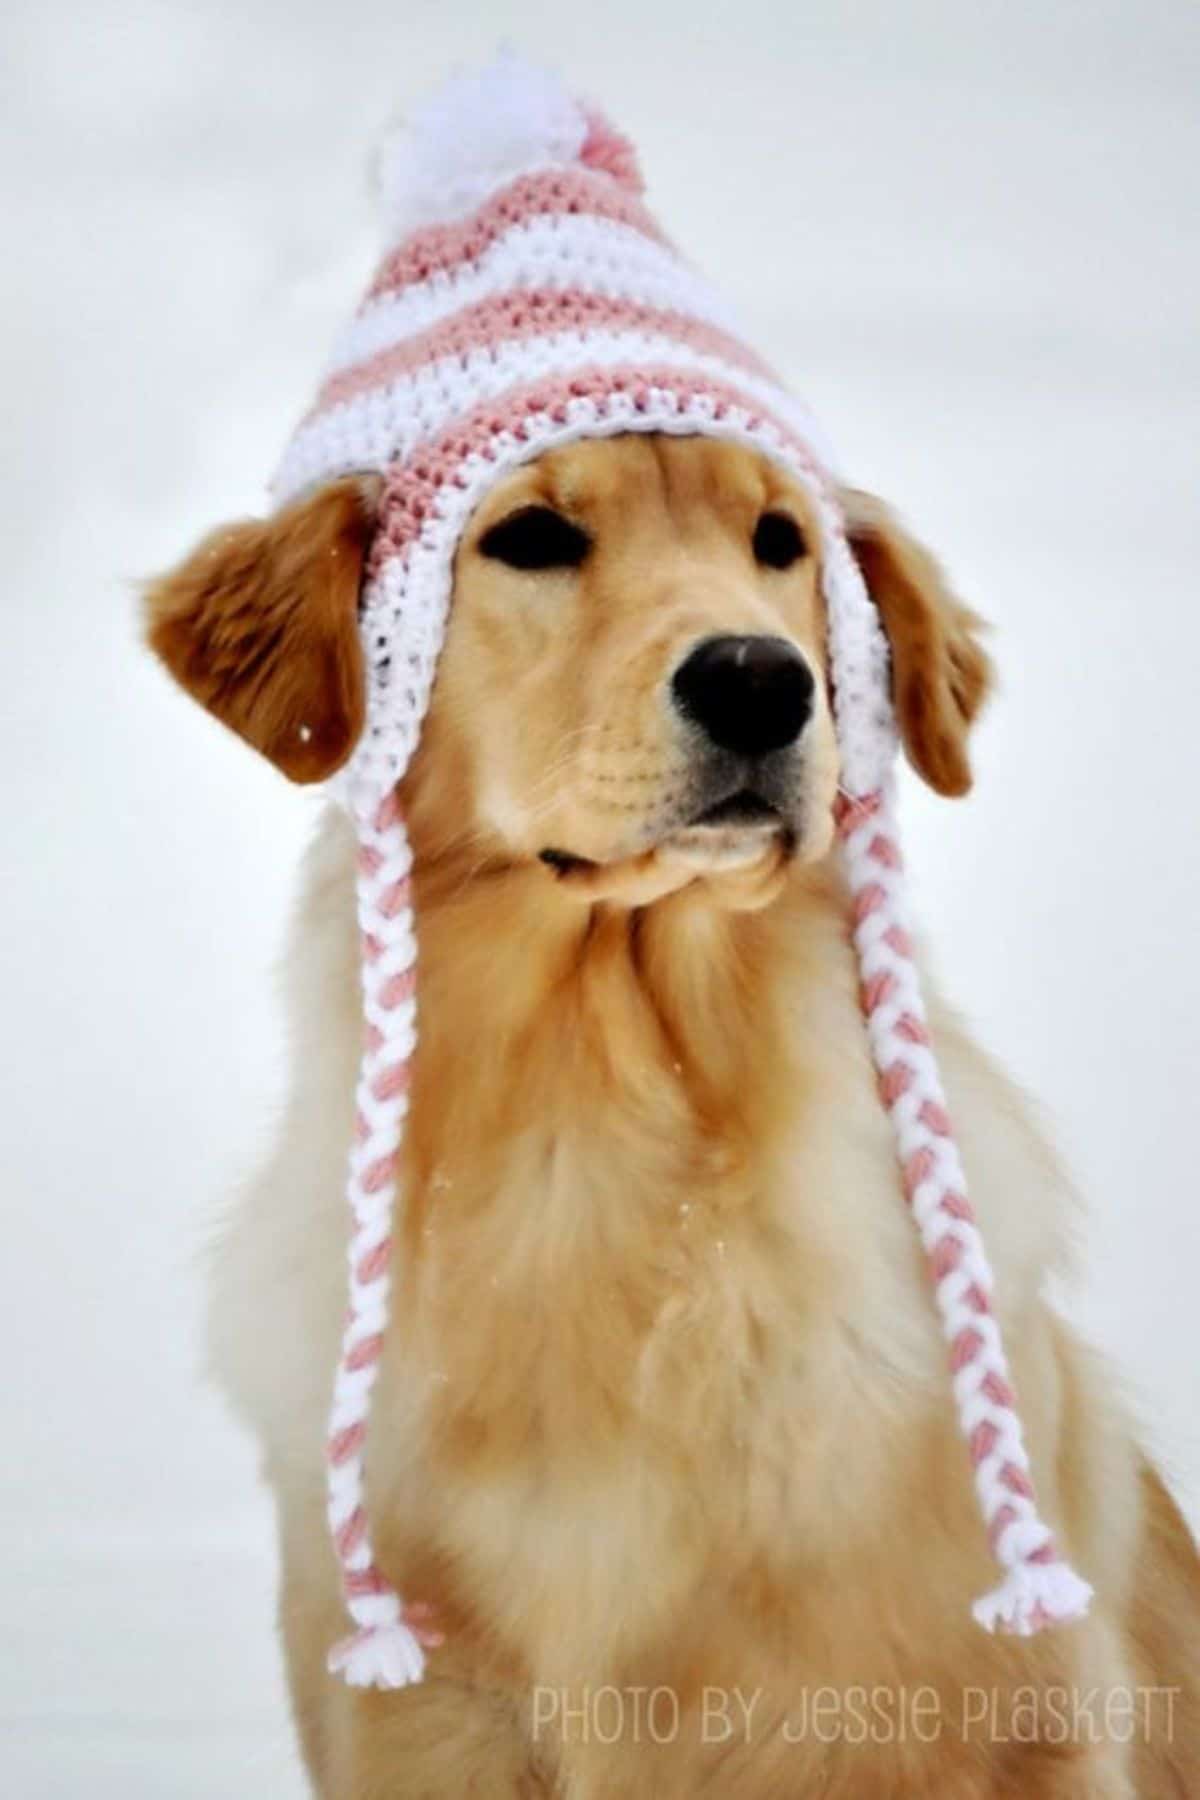 golden retriever wearing a brown and white crocheted hat with a pom pom